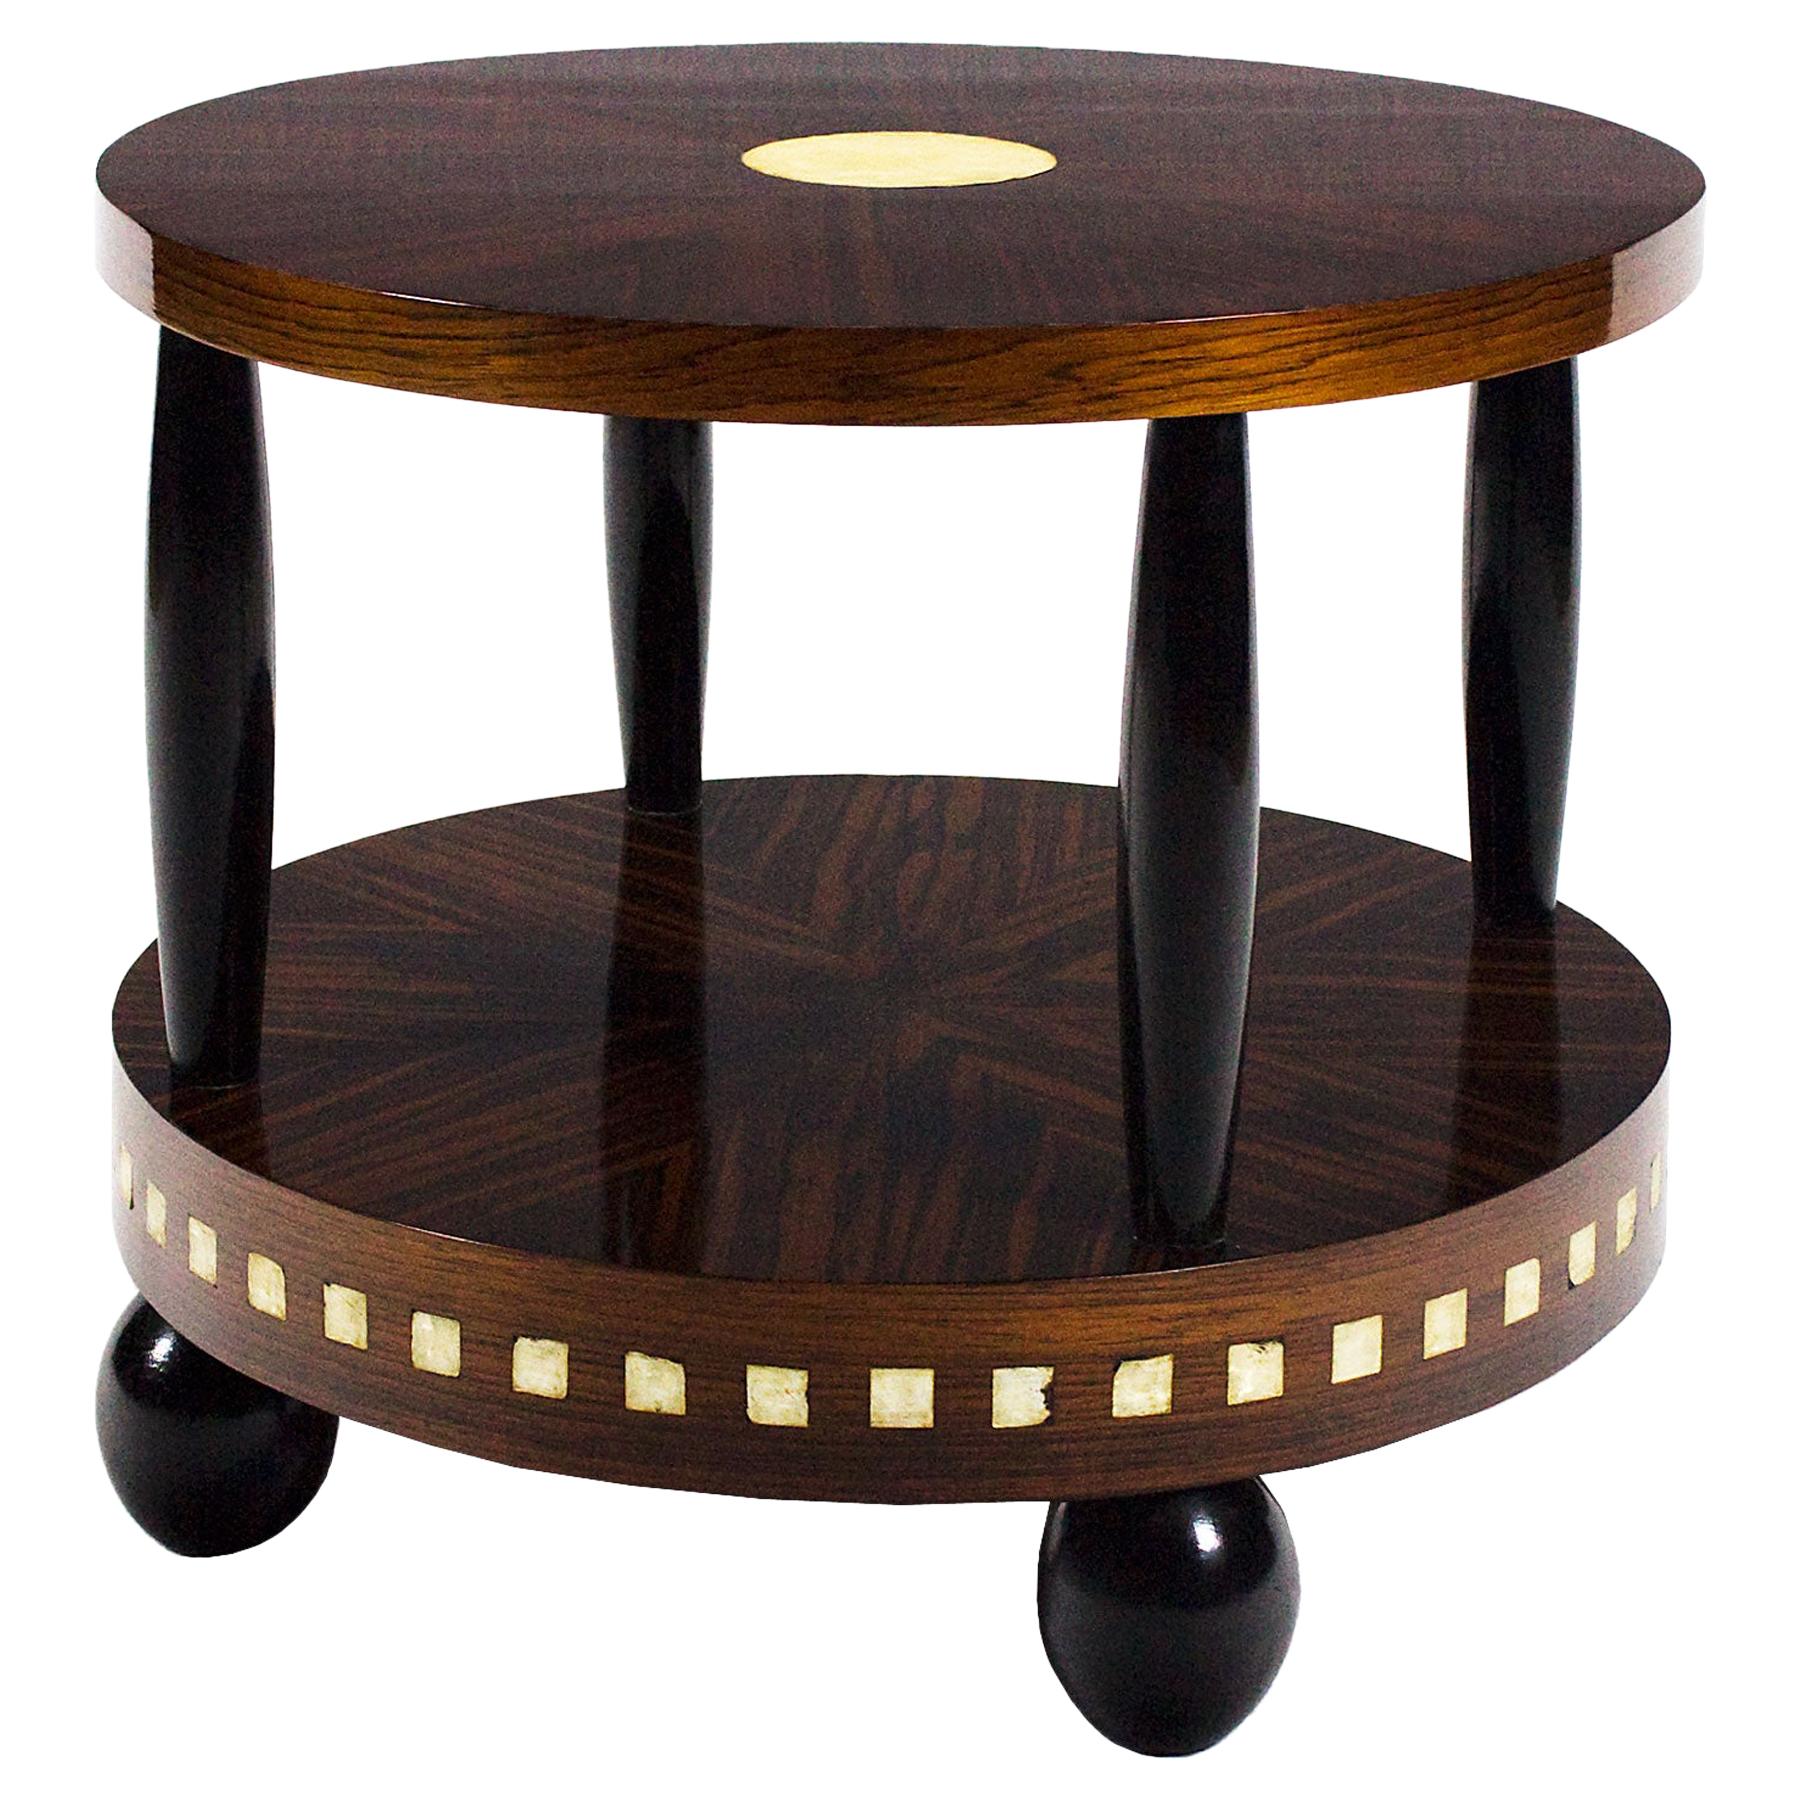 1925 Art Deco Sidetable by Francisque Chaleyssin, Macassar, Mahogany - France For Sale